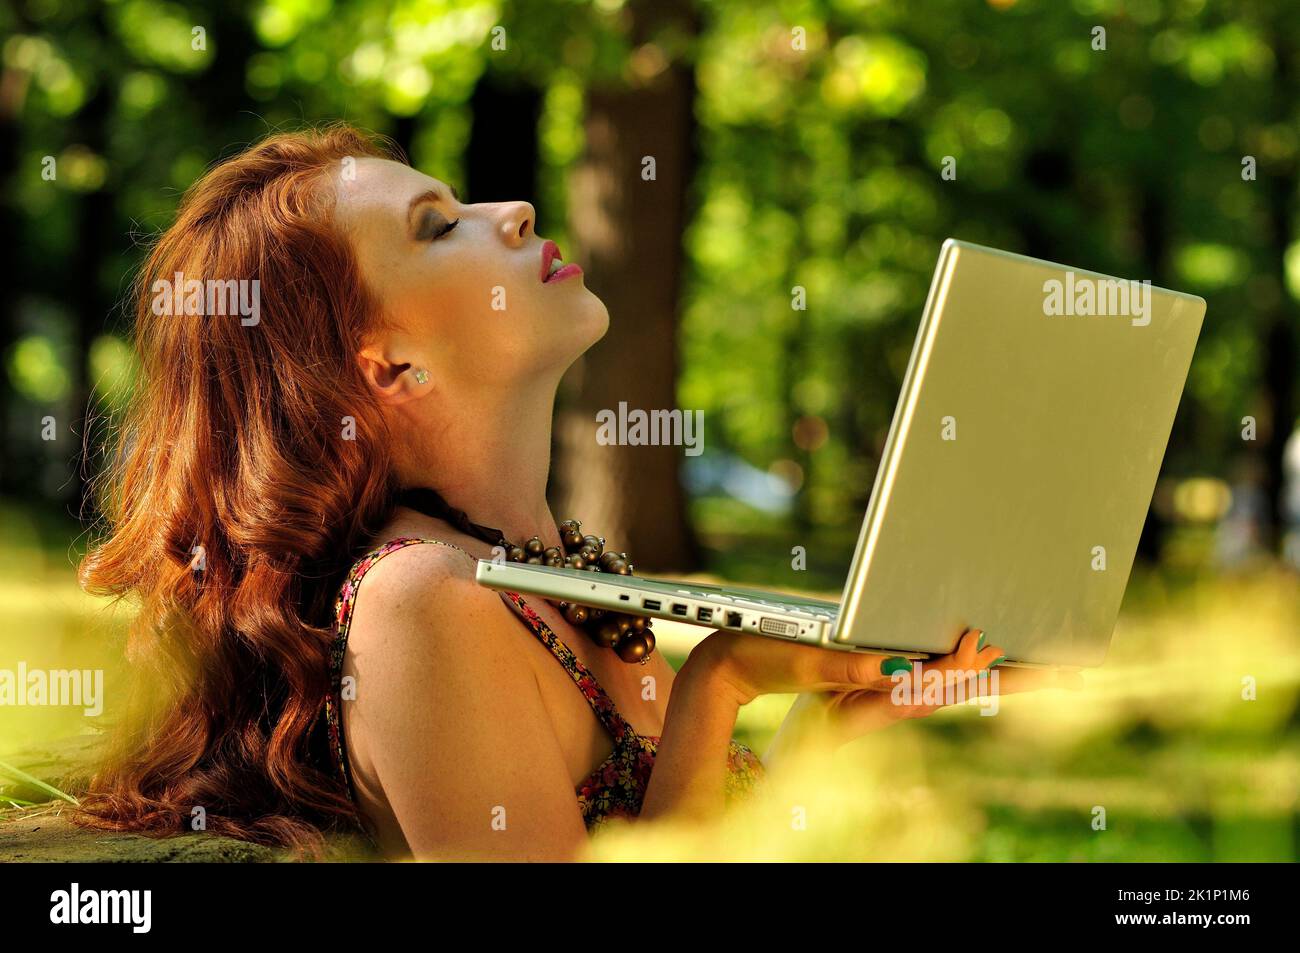 beauty, girl, laptop, mobile, outdoor, redhead, young,pure beauty, natural, mental health, back to the school, influencer, dating, business, Stock Photo